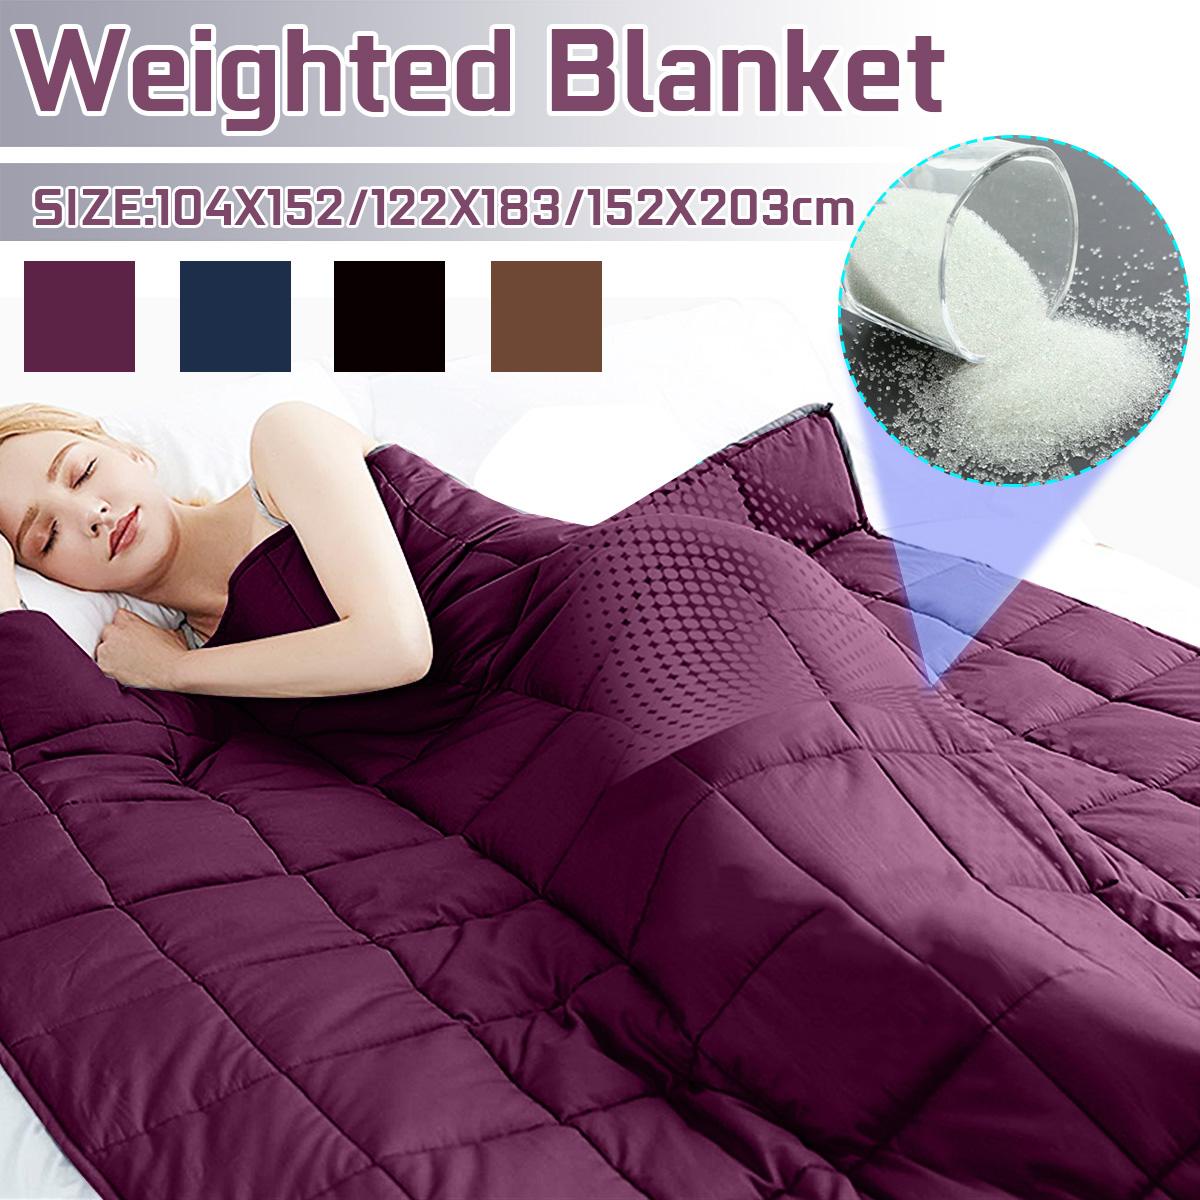 Weighted Blanket for Adult Children Blankets Decompression Sleep Aid Pressure Weighted Quilt Soft Heavy Blanket for Bed Sofa